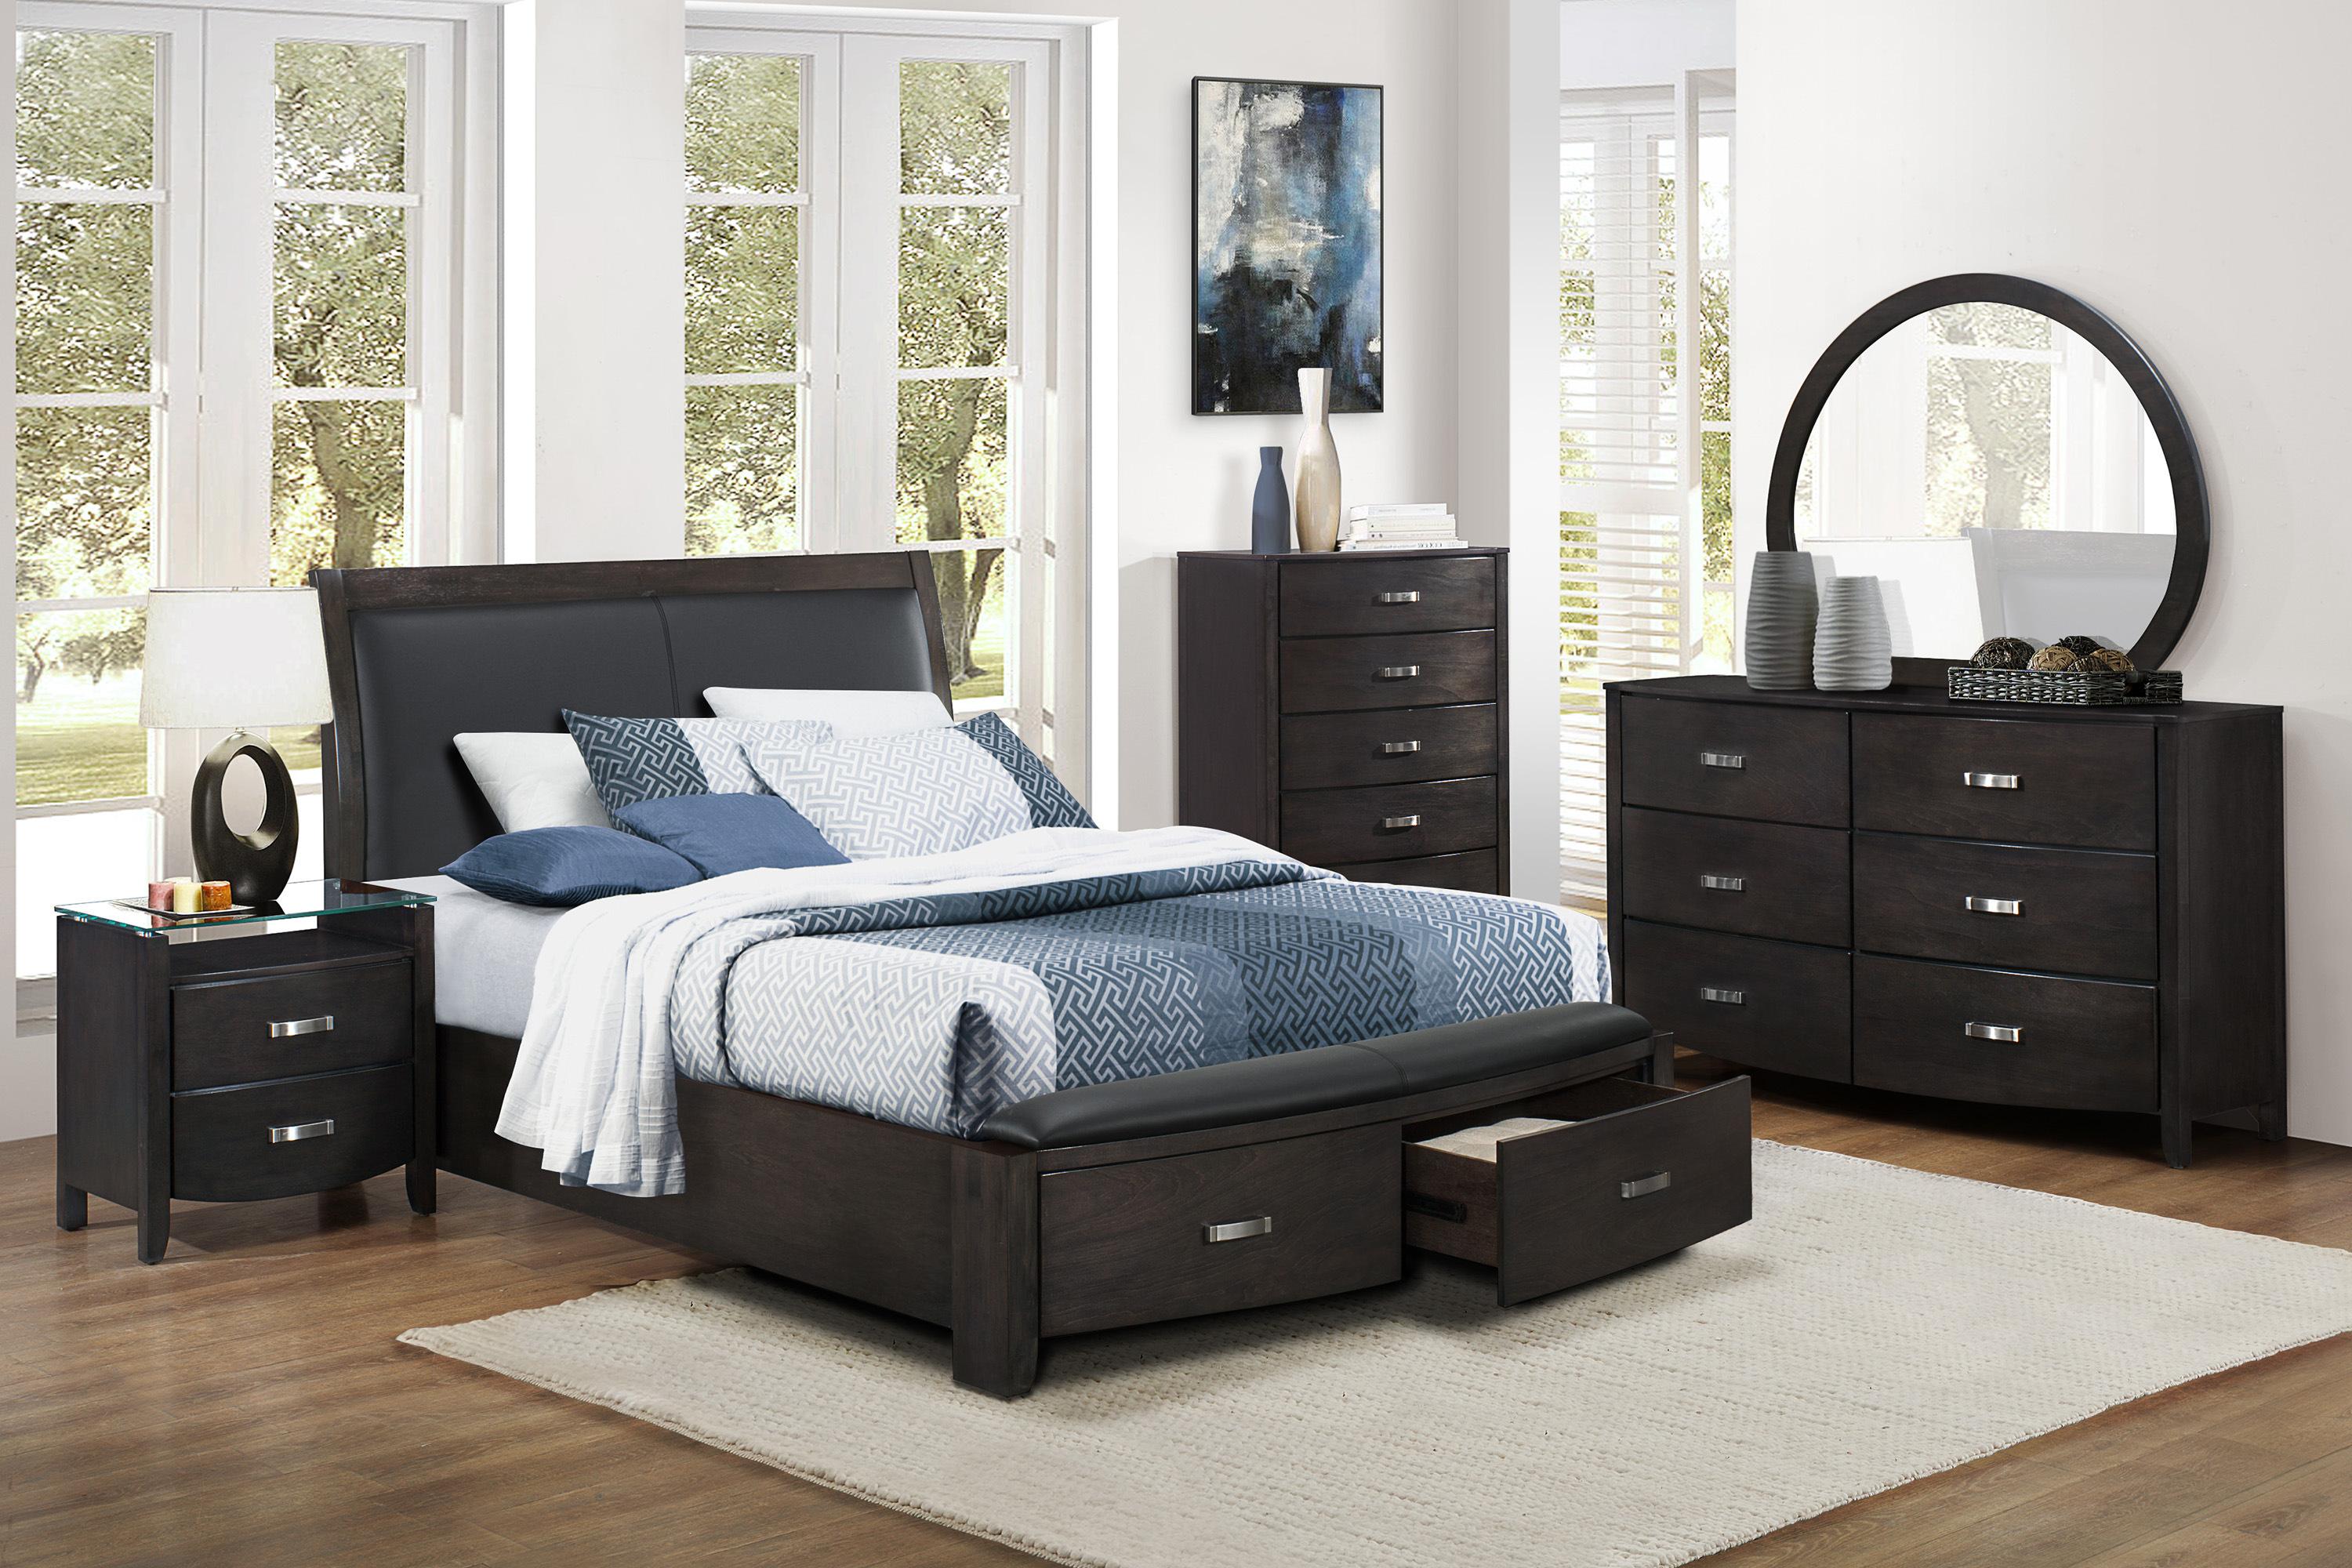 Contemporary Bedroom Set 1737NGY-1-5PC Lyric 1737NGY-1-5PC in Gray Faux Leather